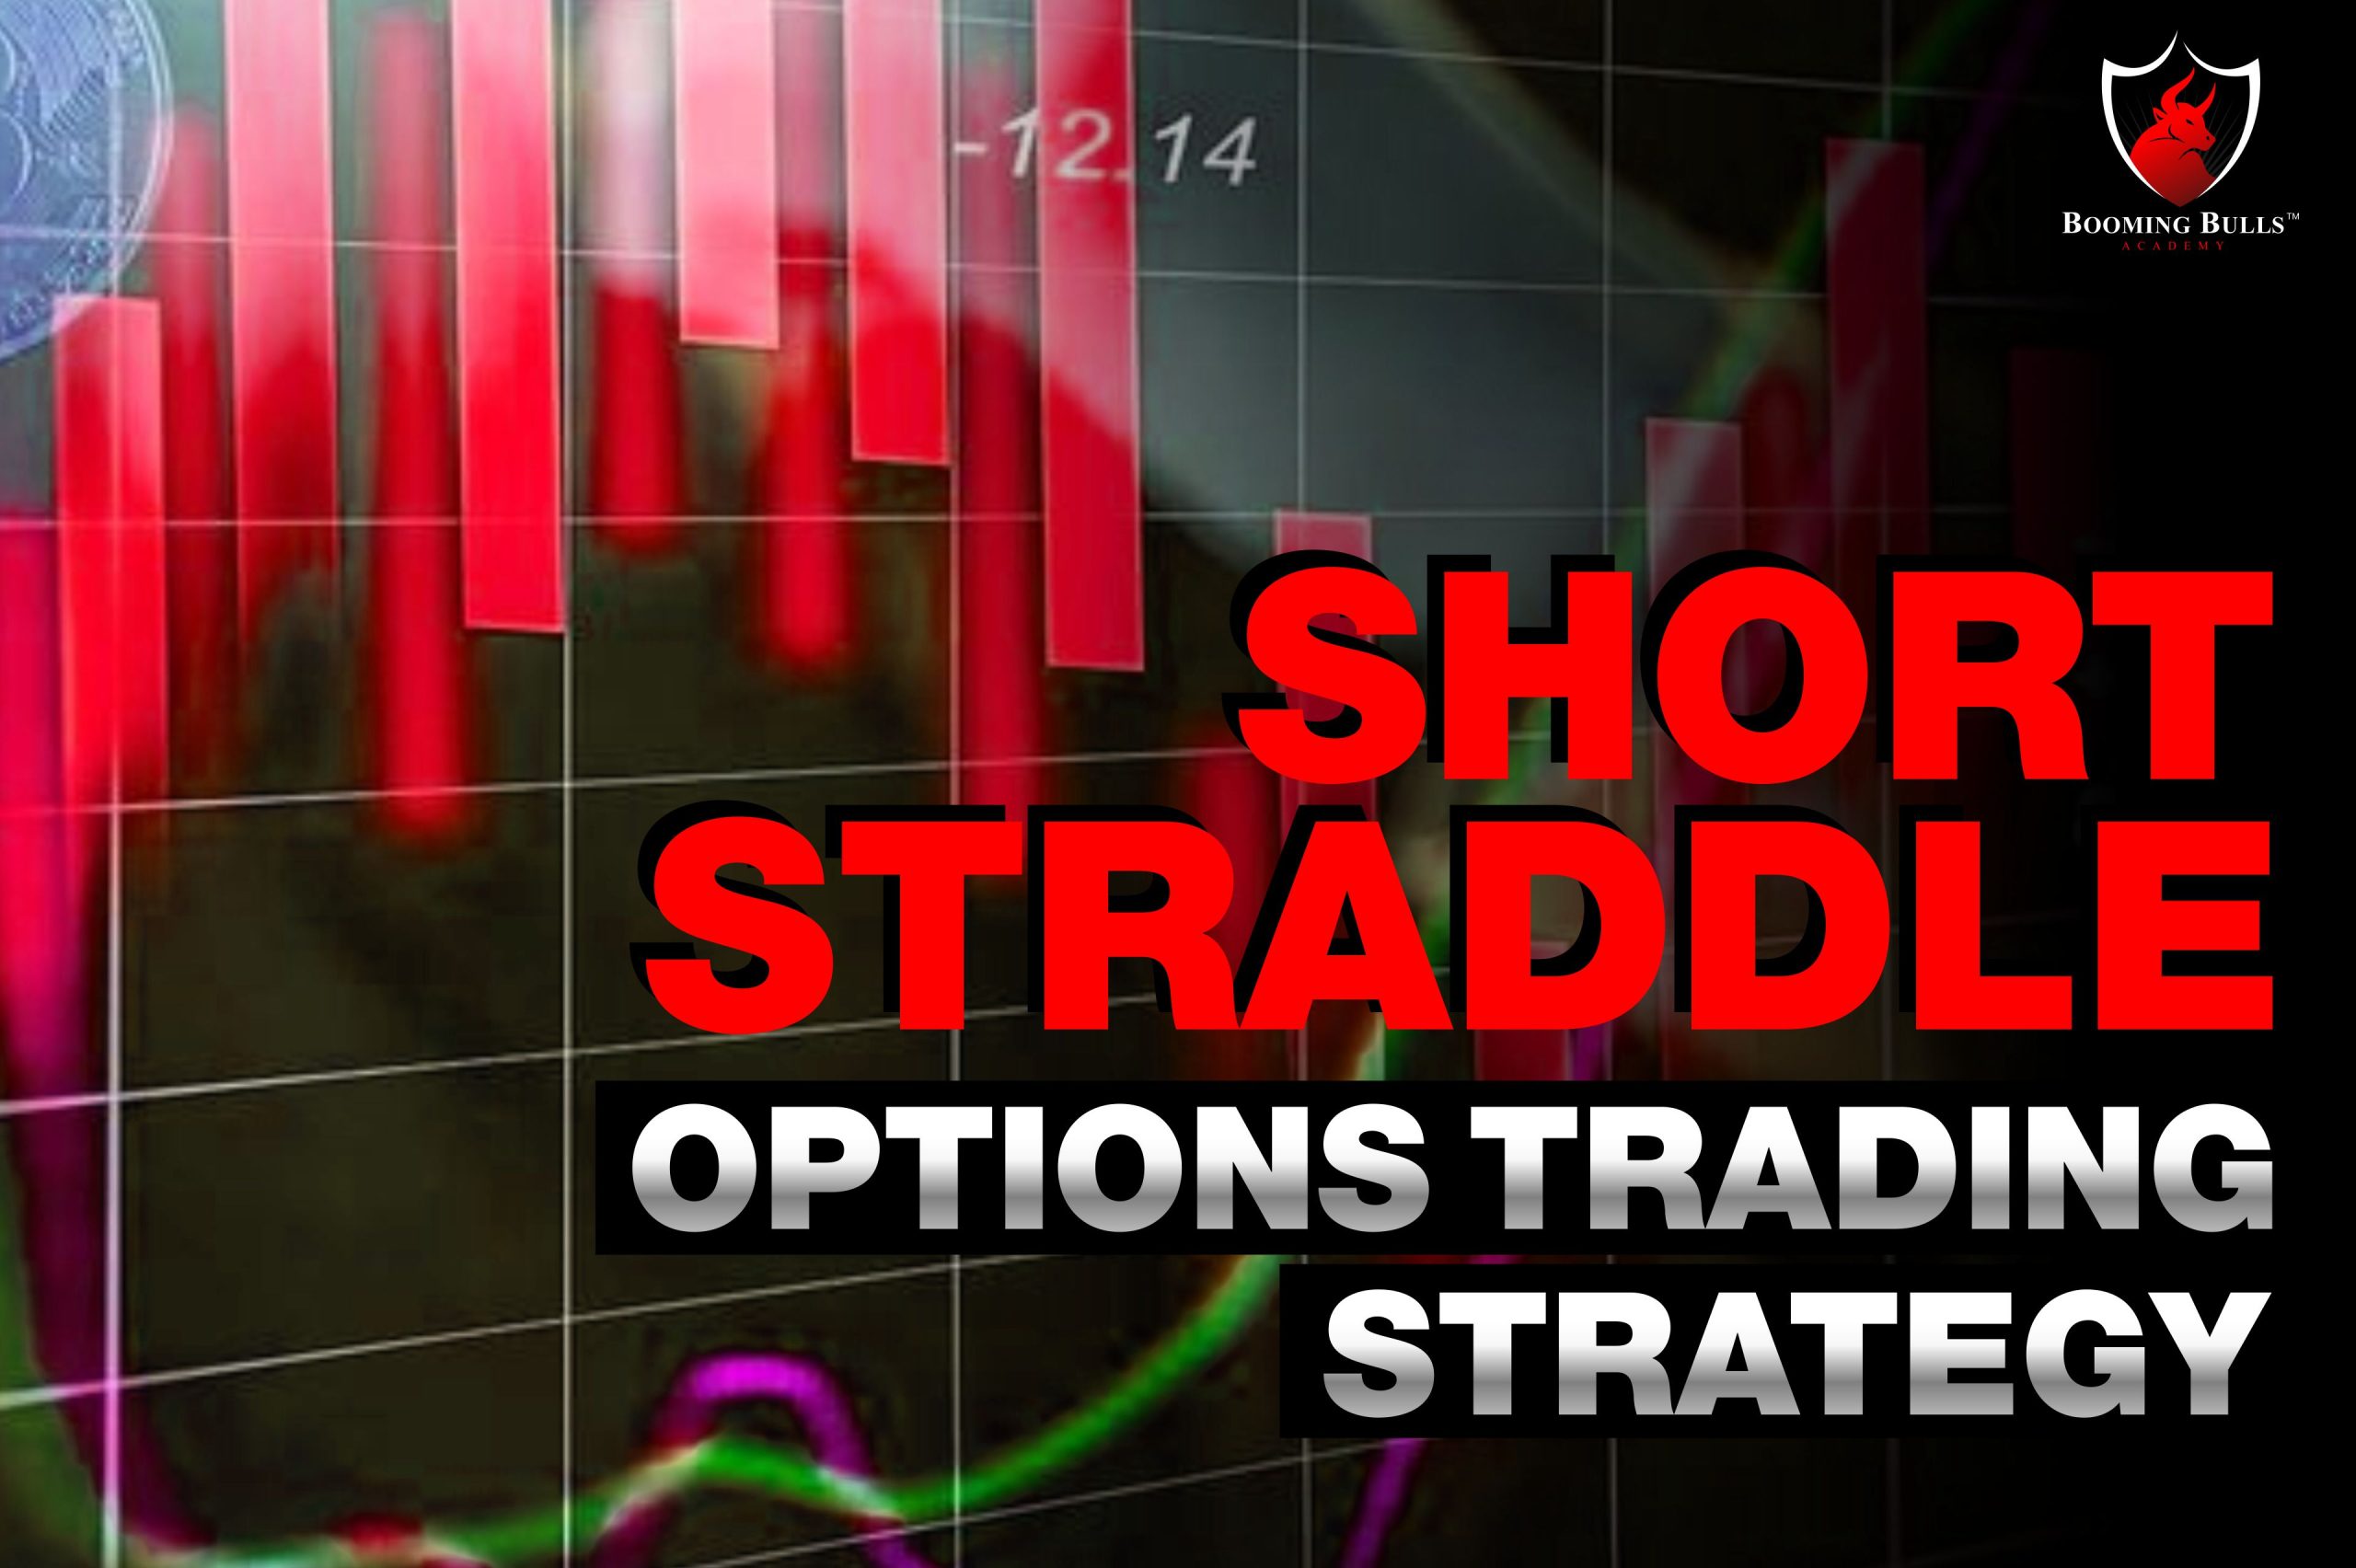 Short Straddle Options Trading Strategy